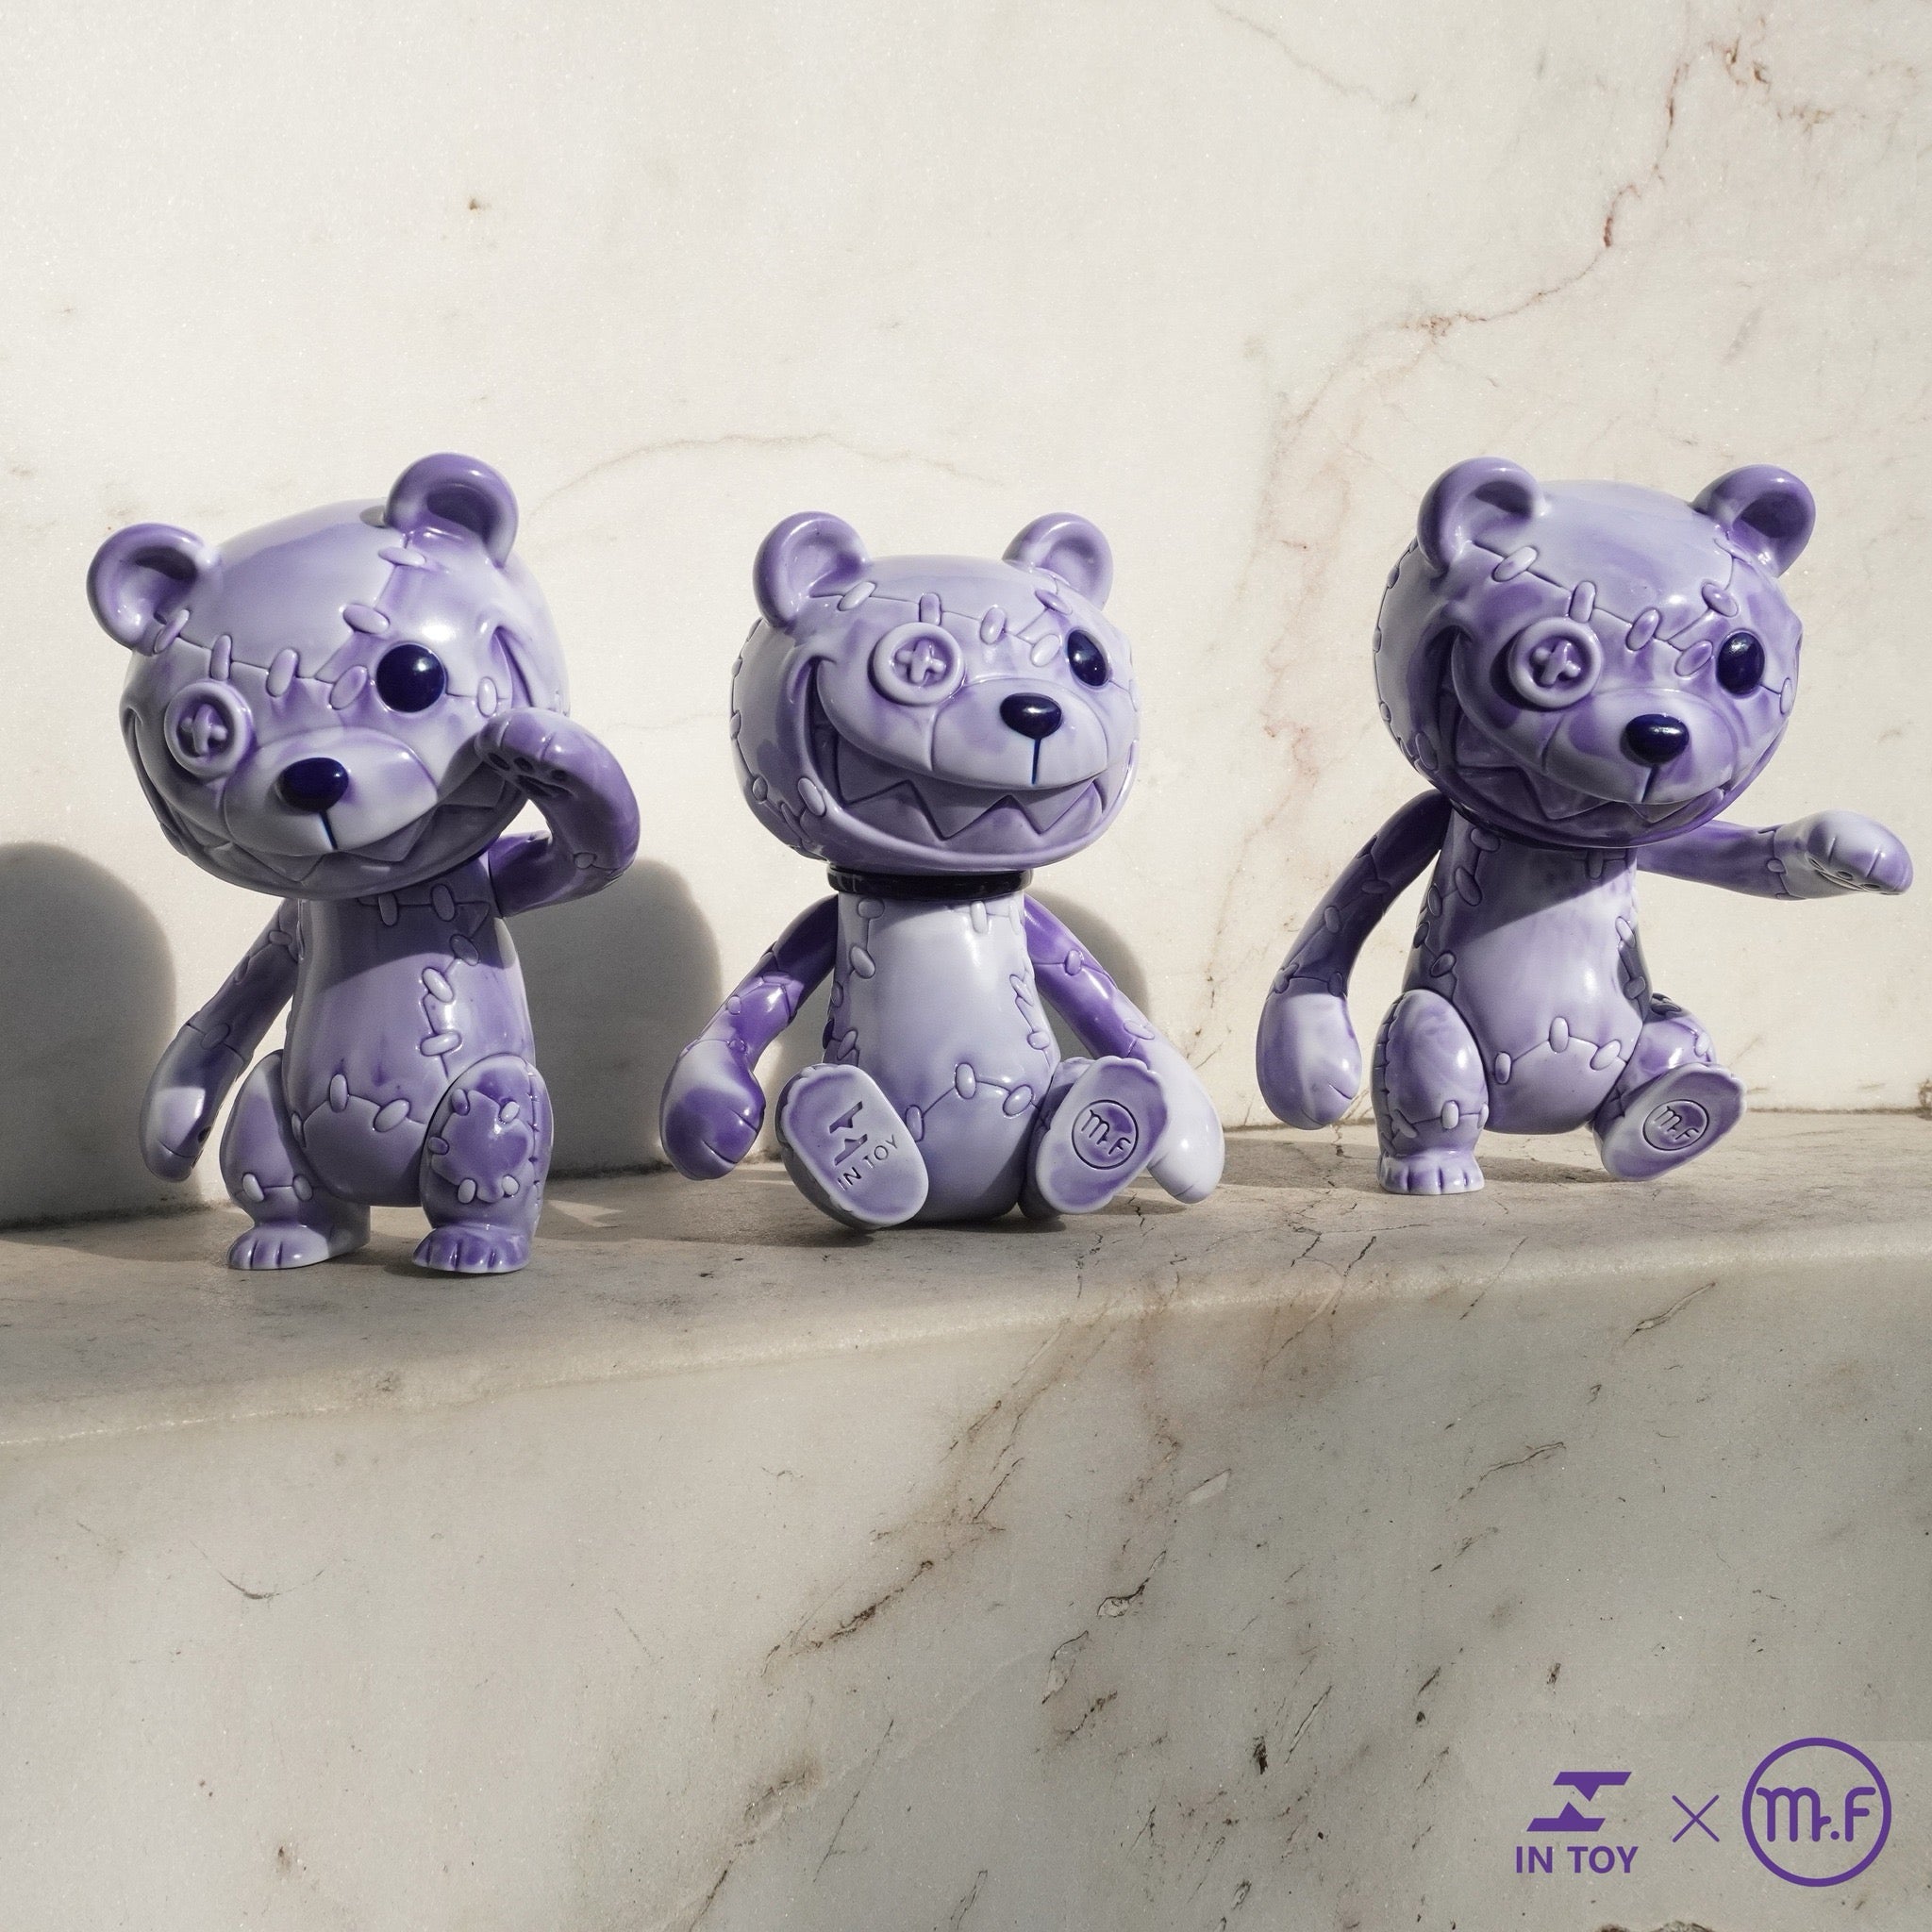 A group of movable purple teddy bears with smiling faces, about 16cm high, made of soft vinyl by Mr.F.